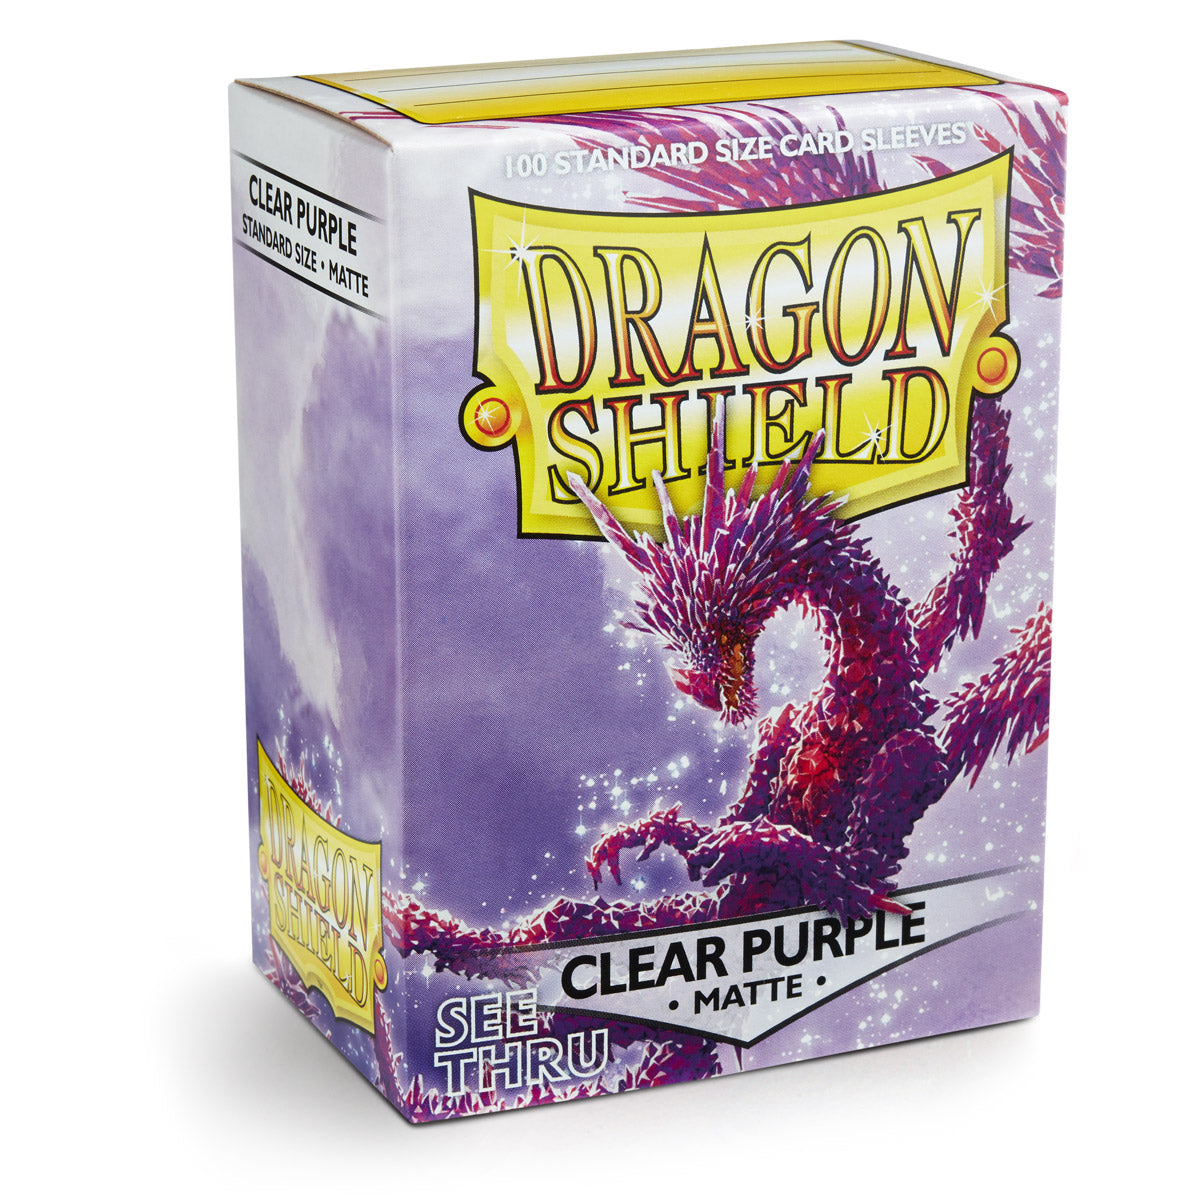 Dragon Shield Deck Protector Sleeves - Matte Clear Purple (100 Count)